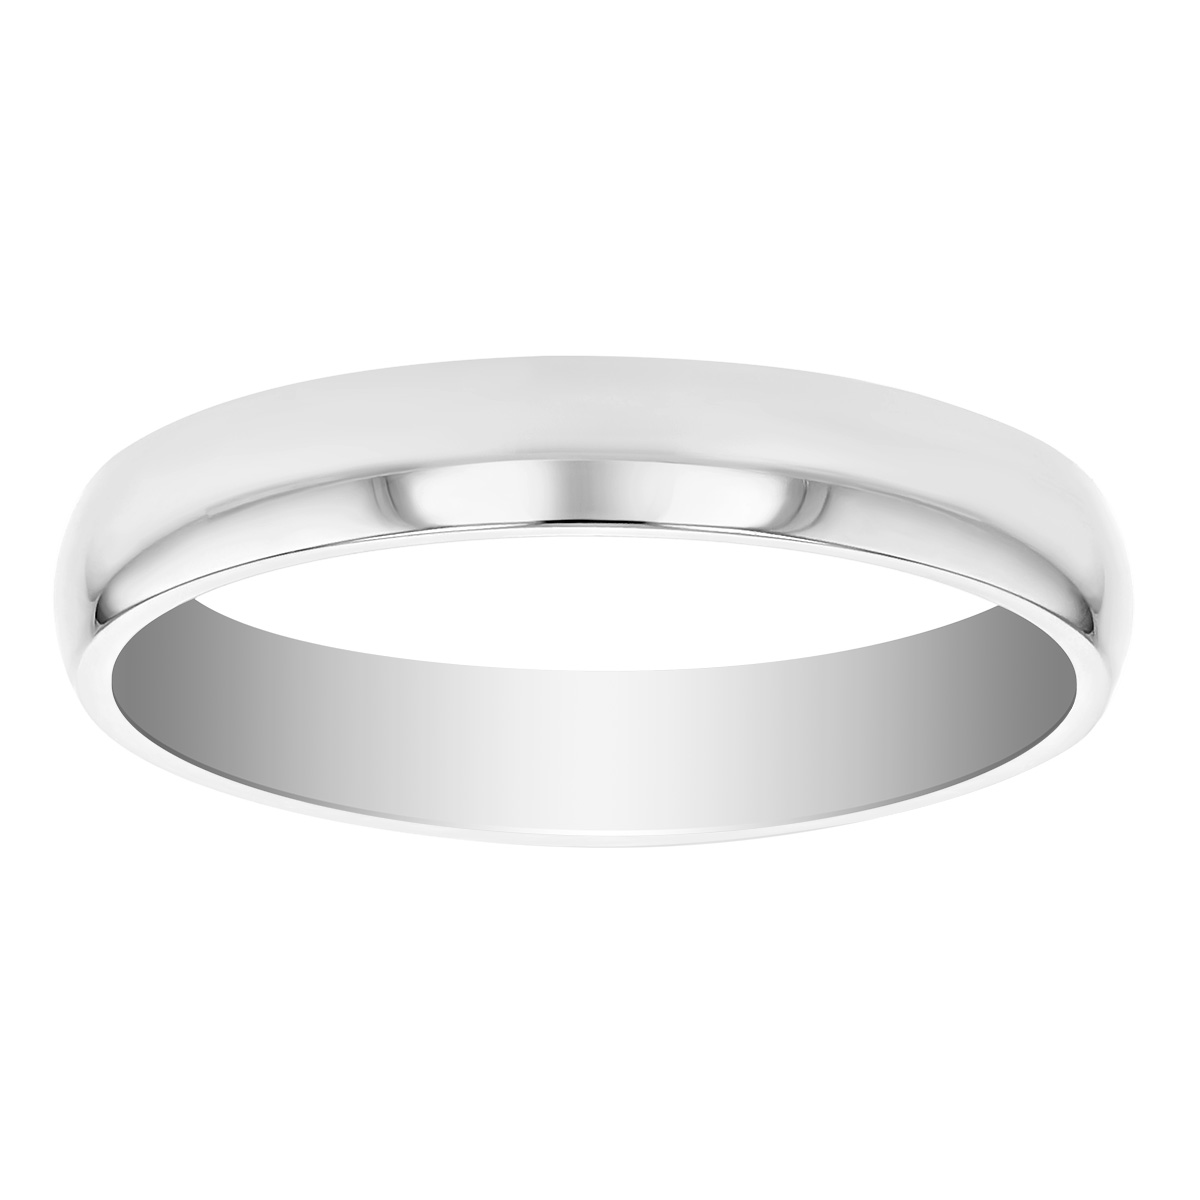 Platinum Comfort Fit Low Dome 3 Mm Wedding Band Size 6 Borsheims